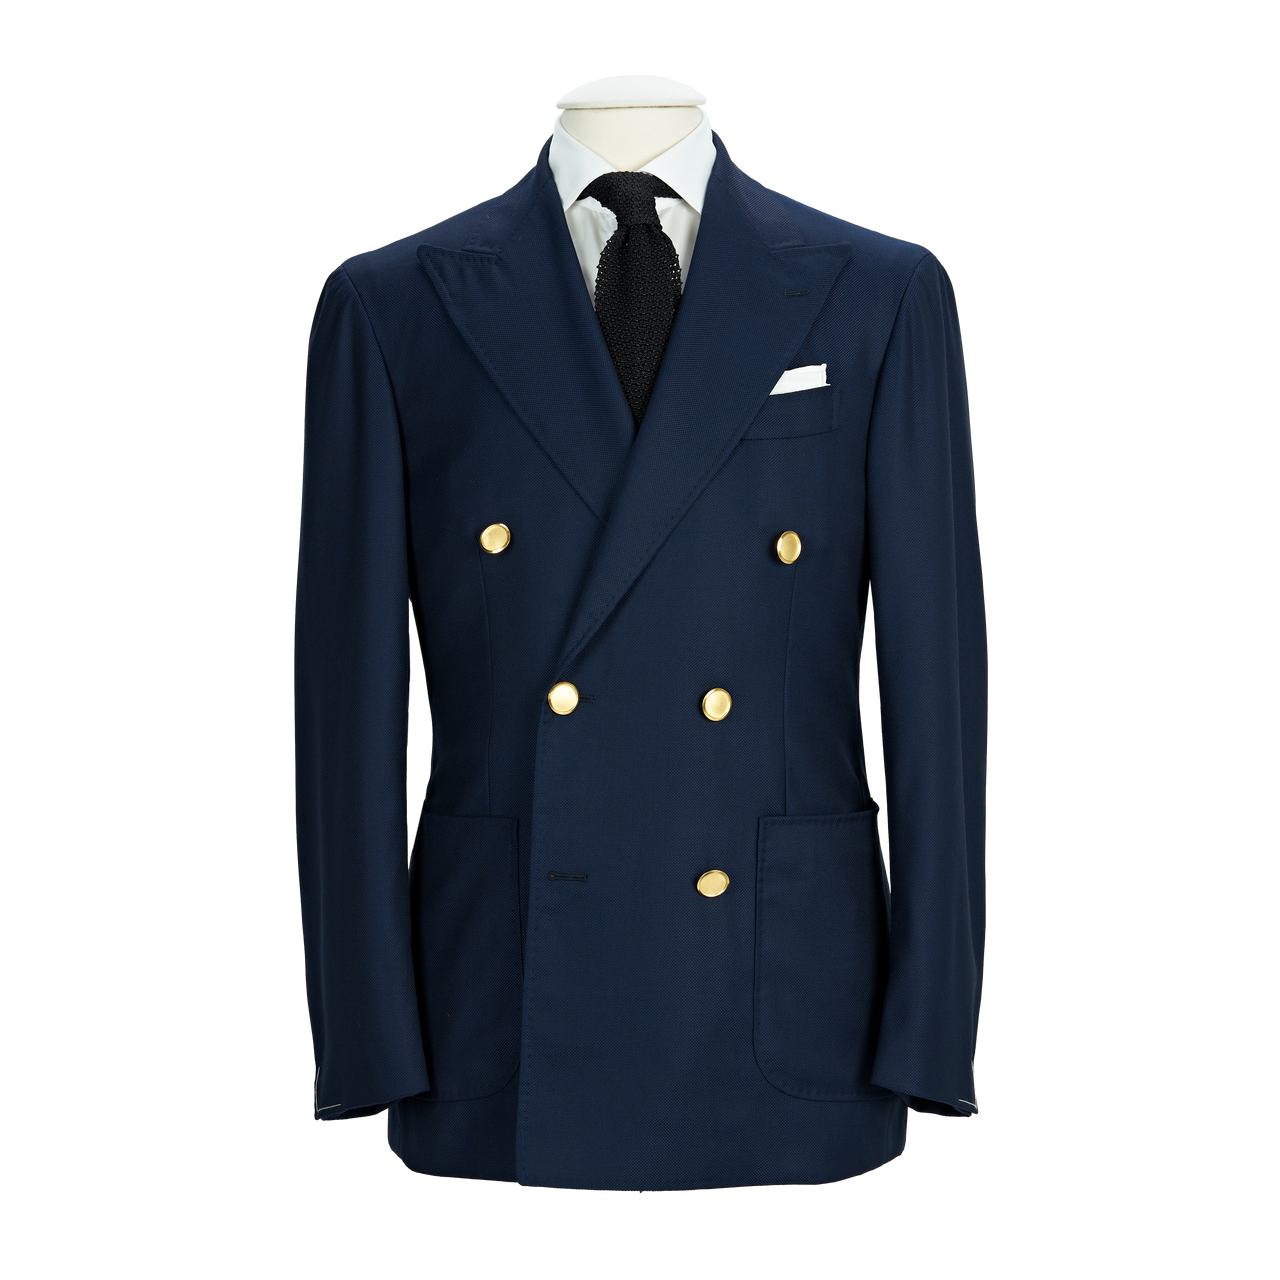 Ring Jacket Double Breasted Sport Jacket 304 in Navy Wool with Gold Buttons